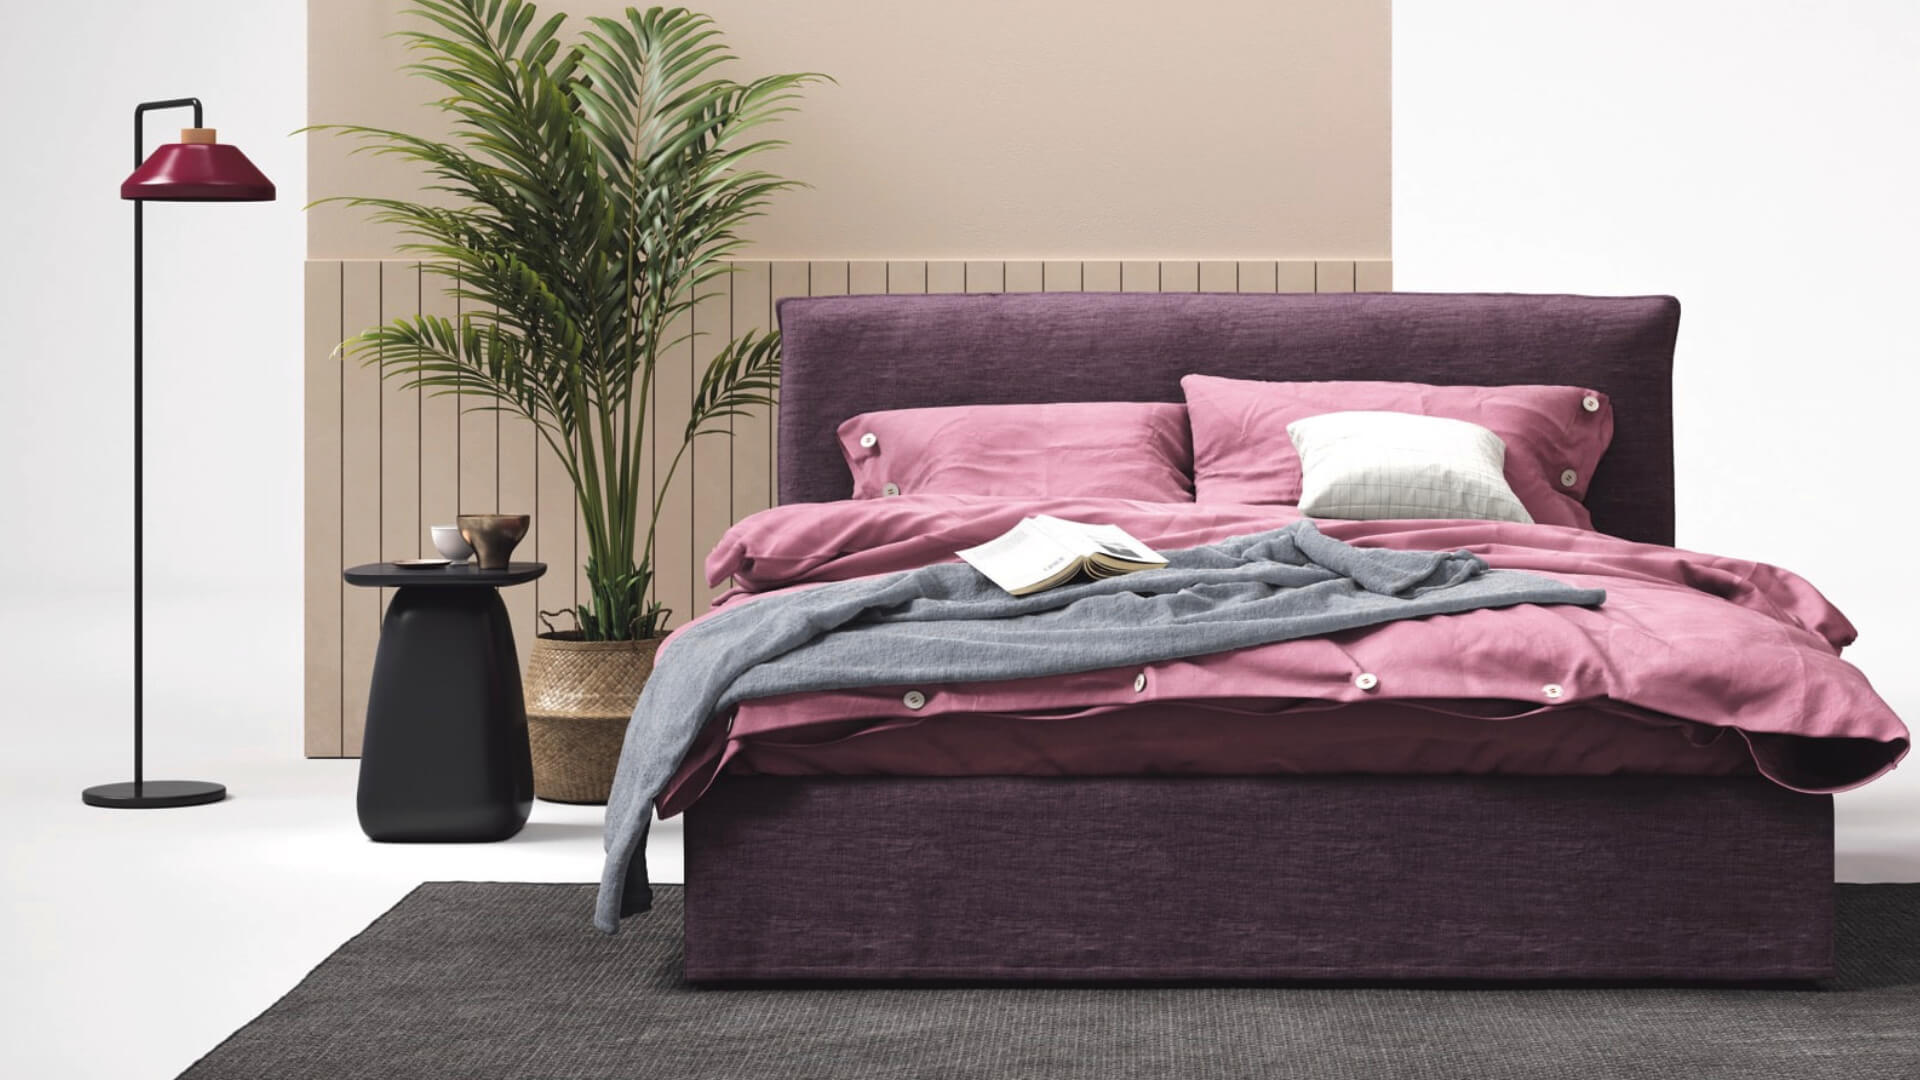 Blog IDW - Useful tips for choosing the right furniture for your bedroom